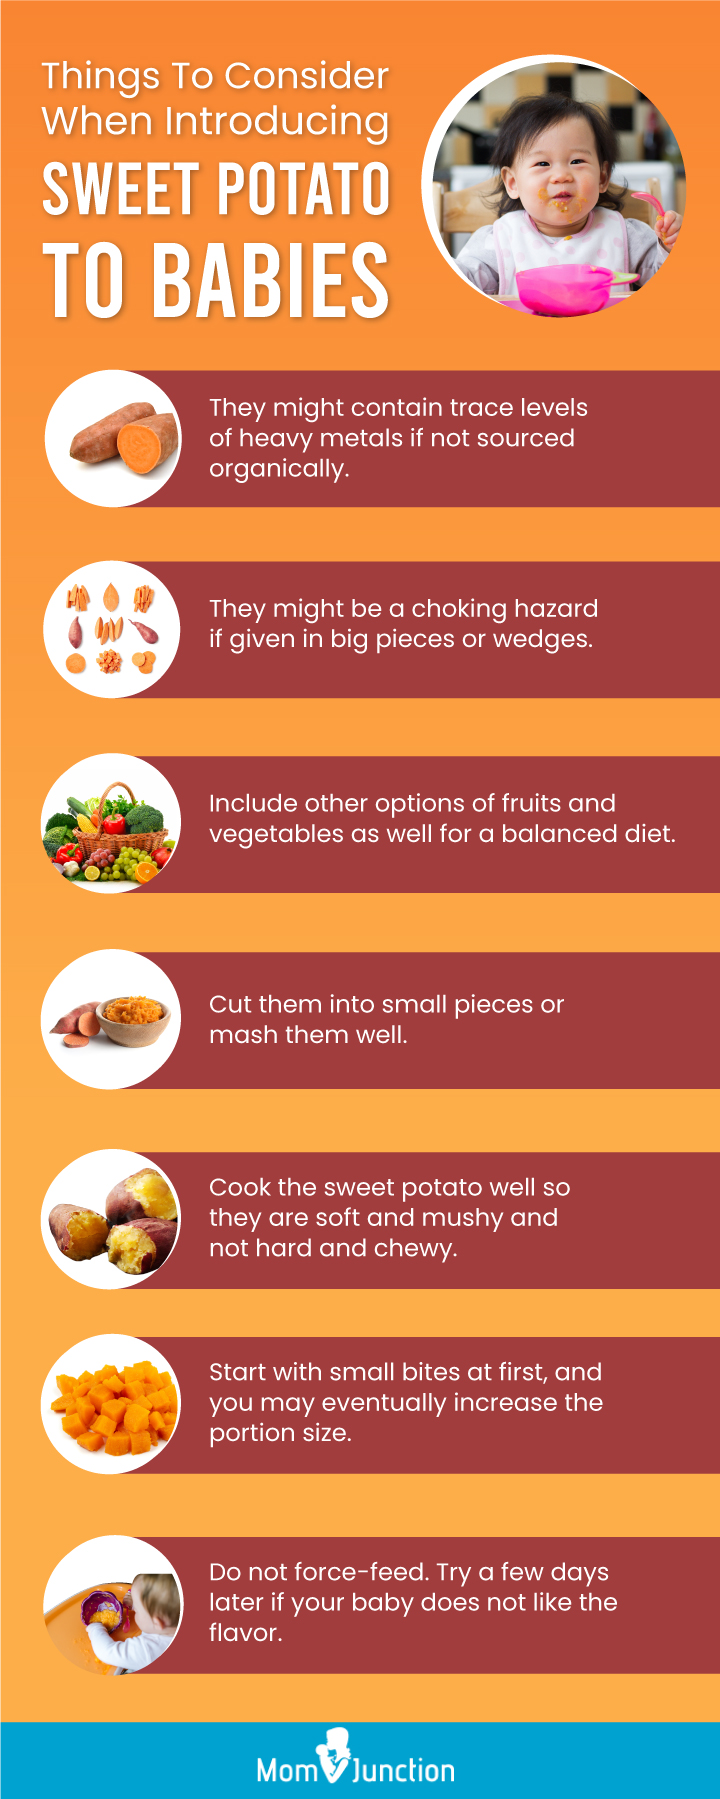 things to consider when introducing sweet potato to babies [infographic]